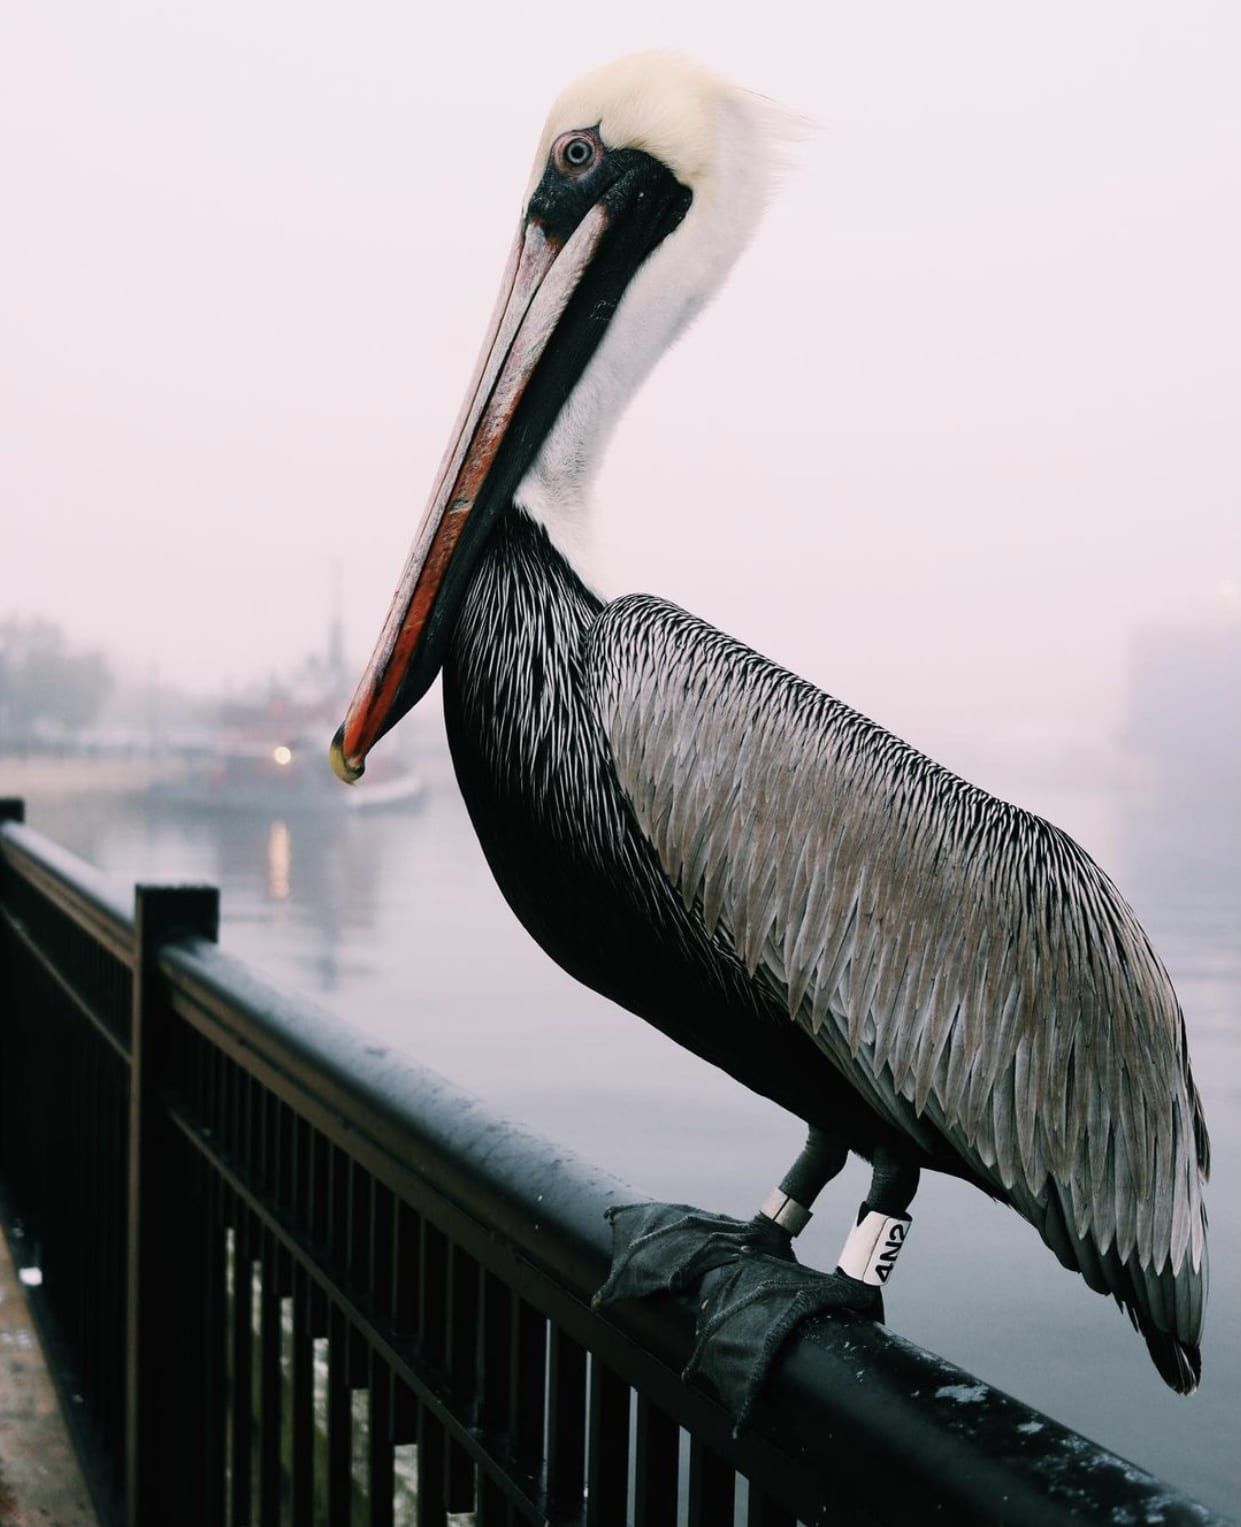 A rainy day ahead of us, but this pelican doesn't seem to mind.
Today's Photo of the Day was taken by Kayla Guzman.